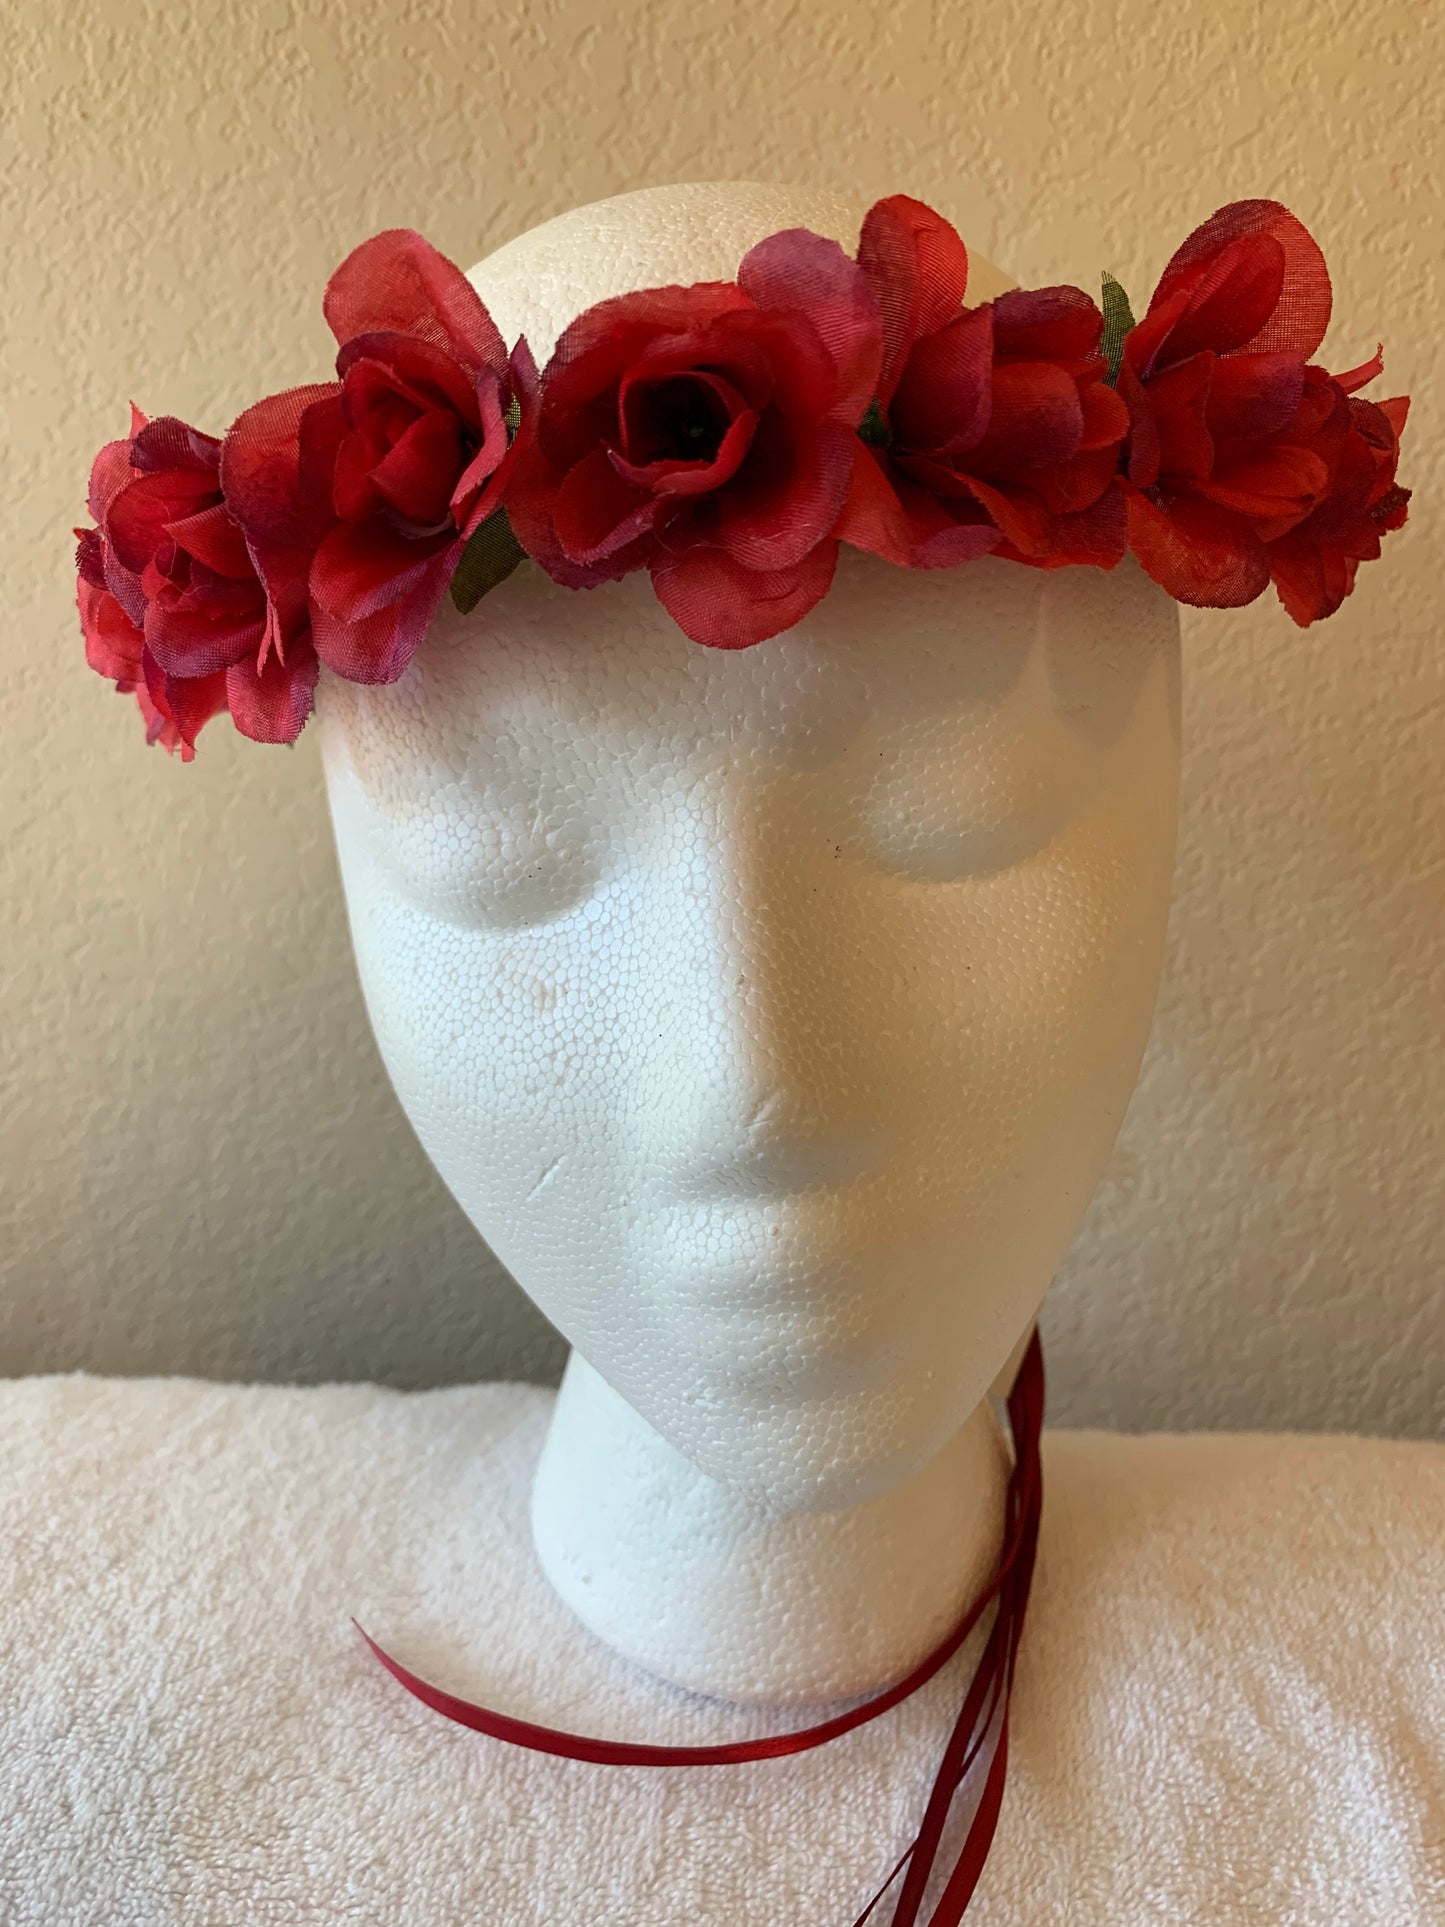 Extra Small Wreath - Red Roses